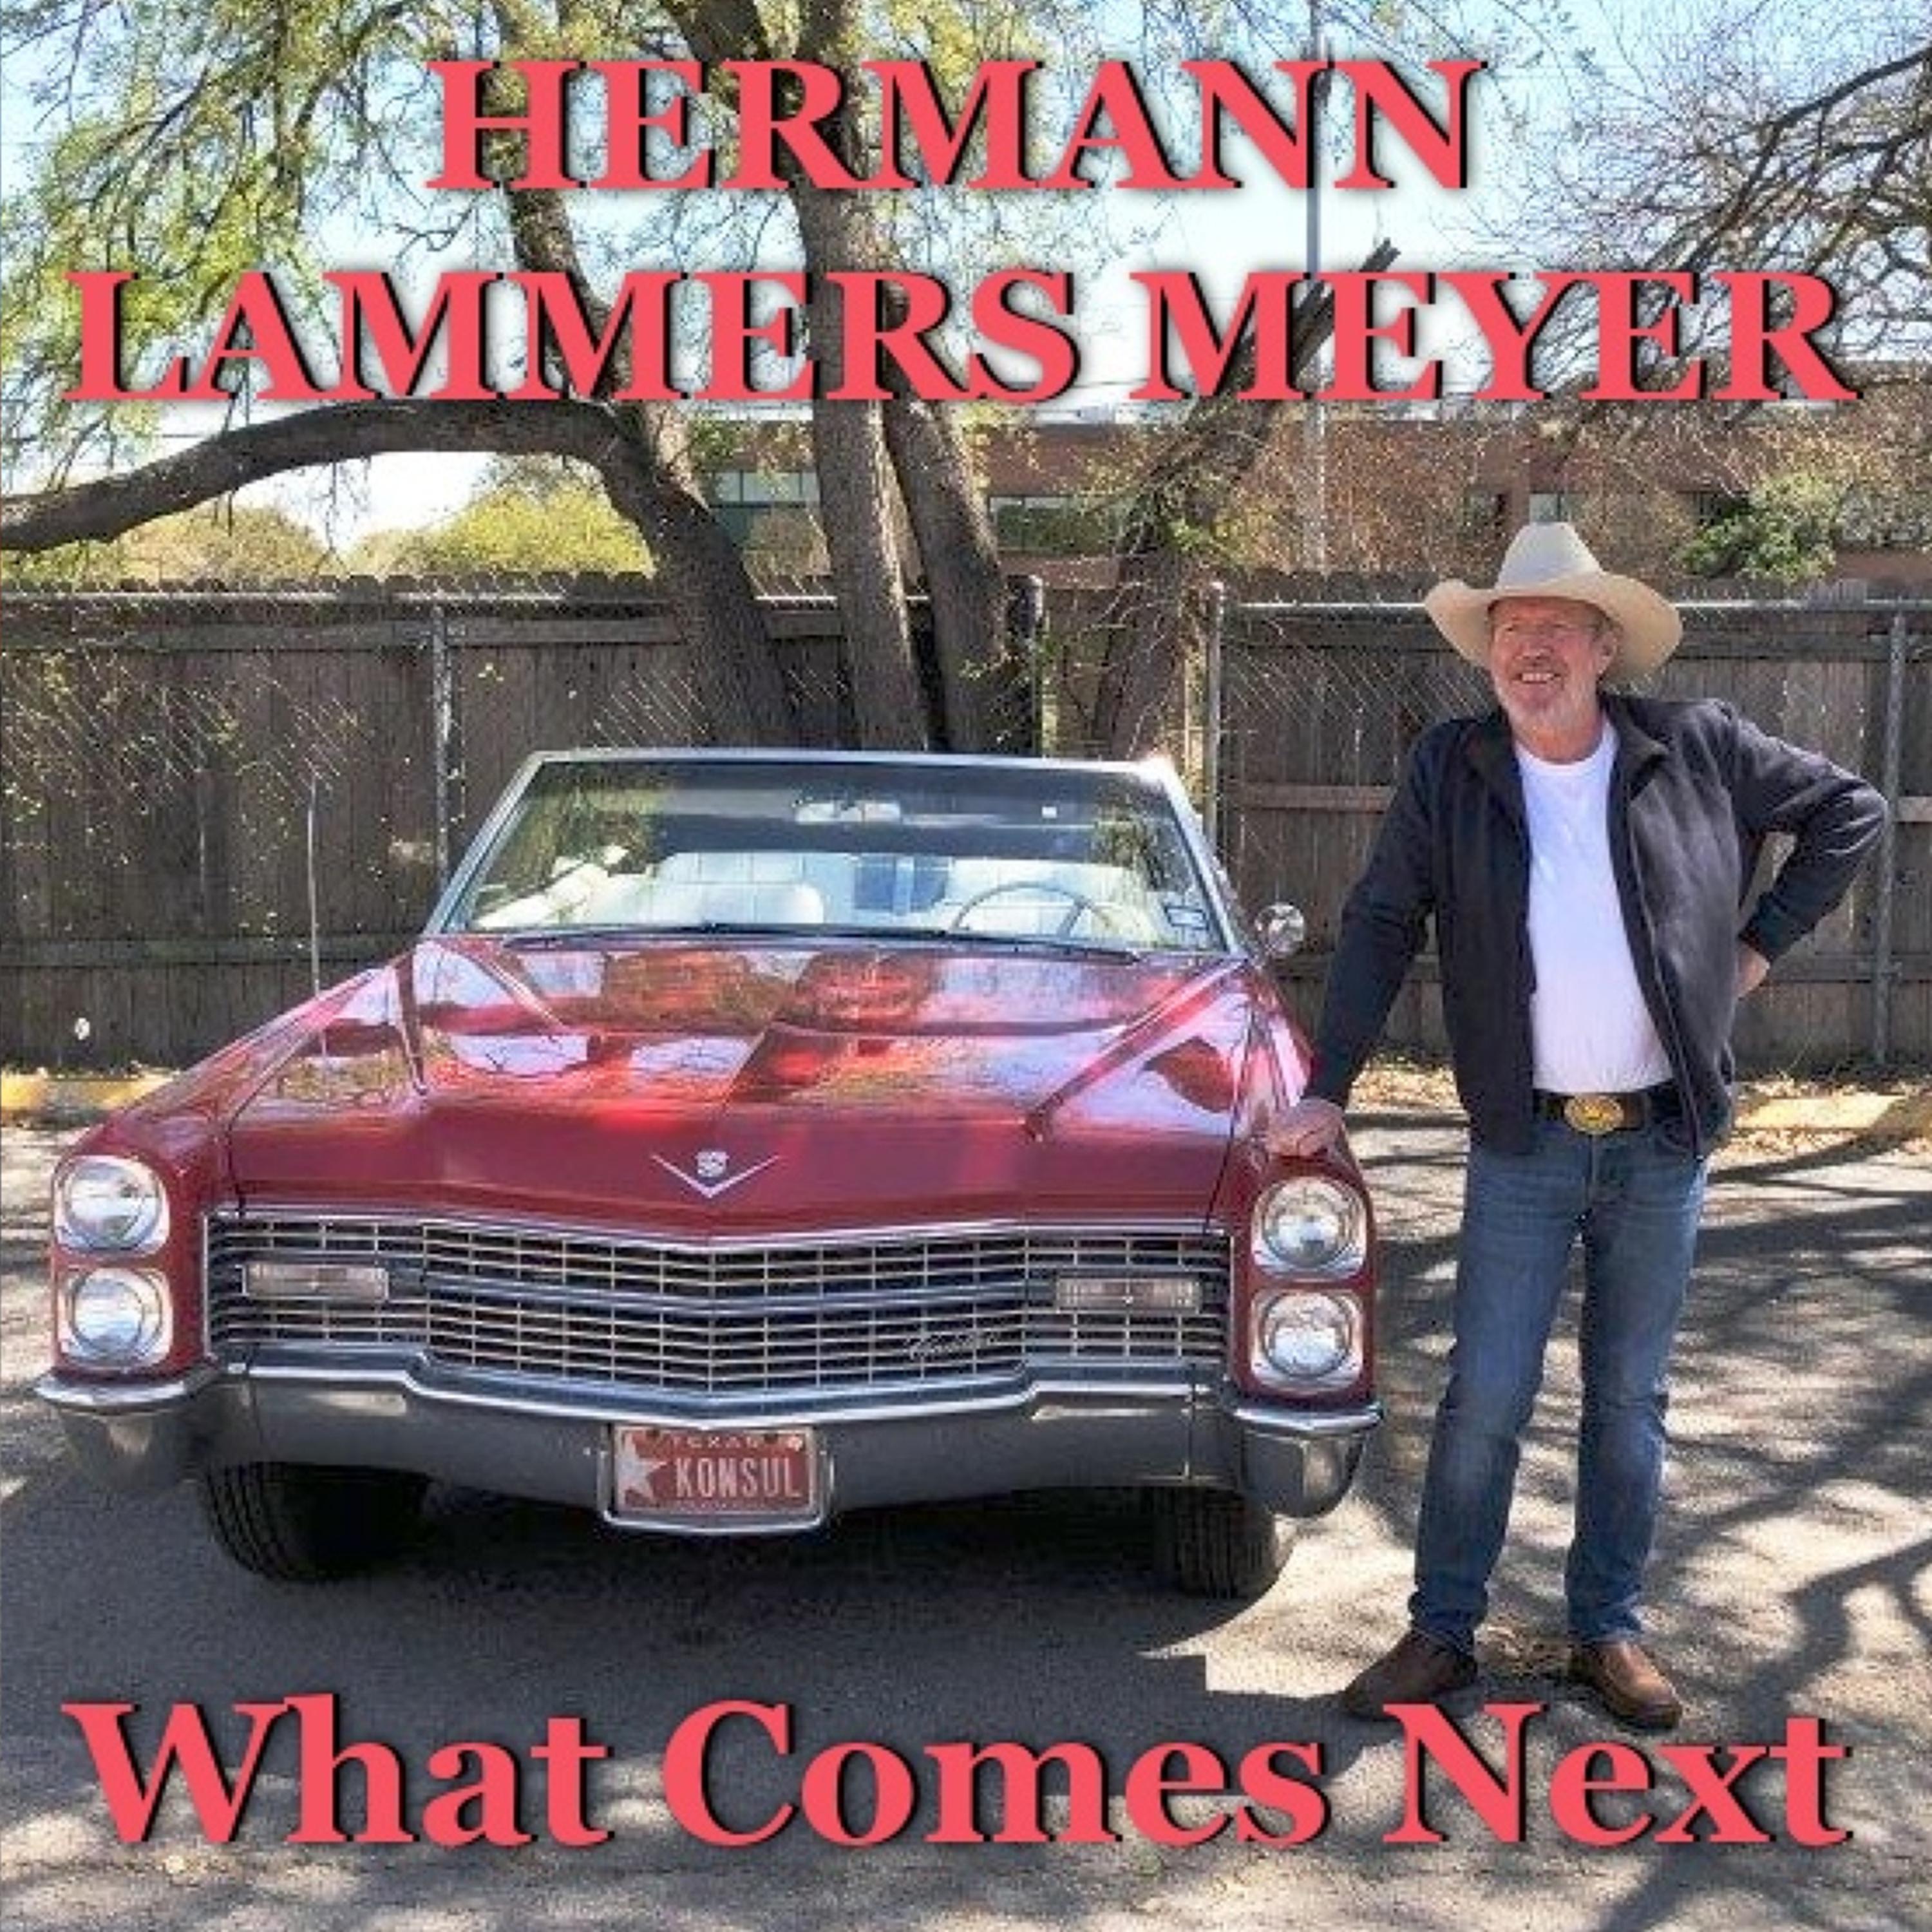 Hermann Lammers Meyer - We Live Country